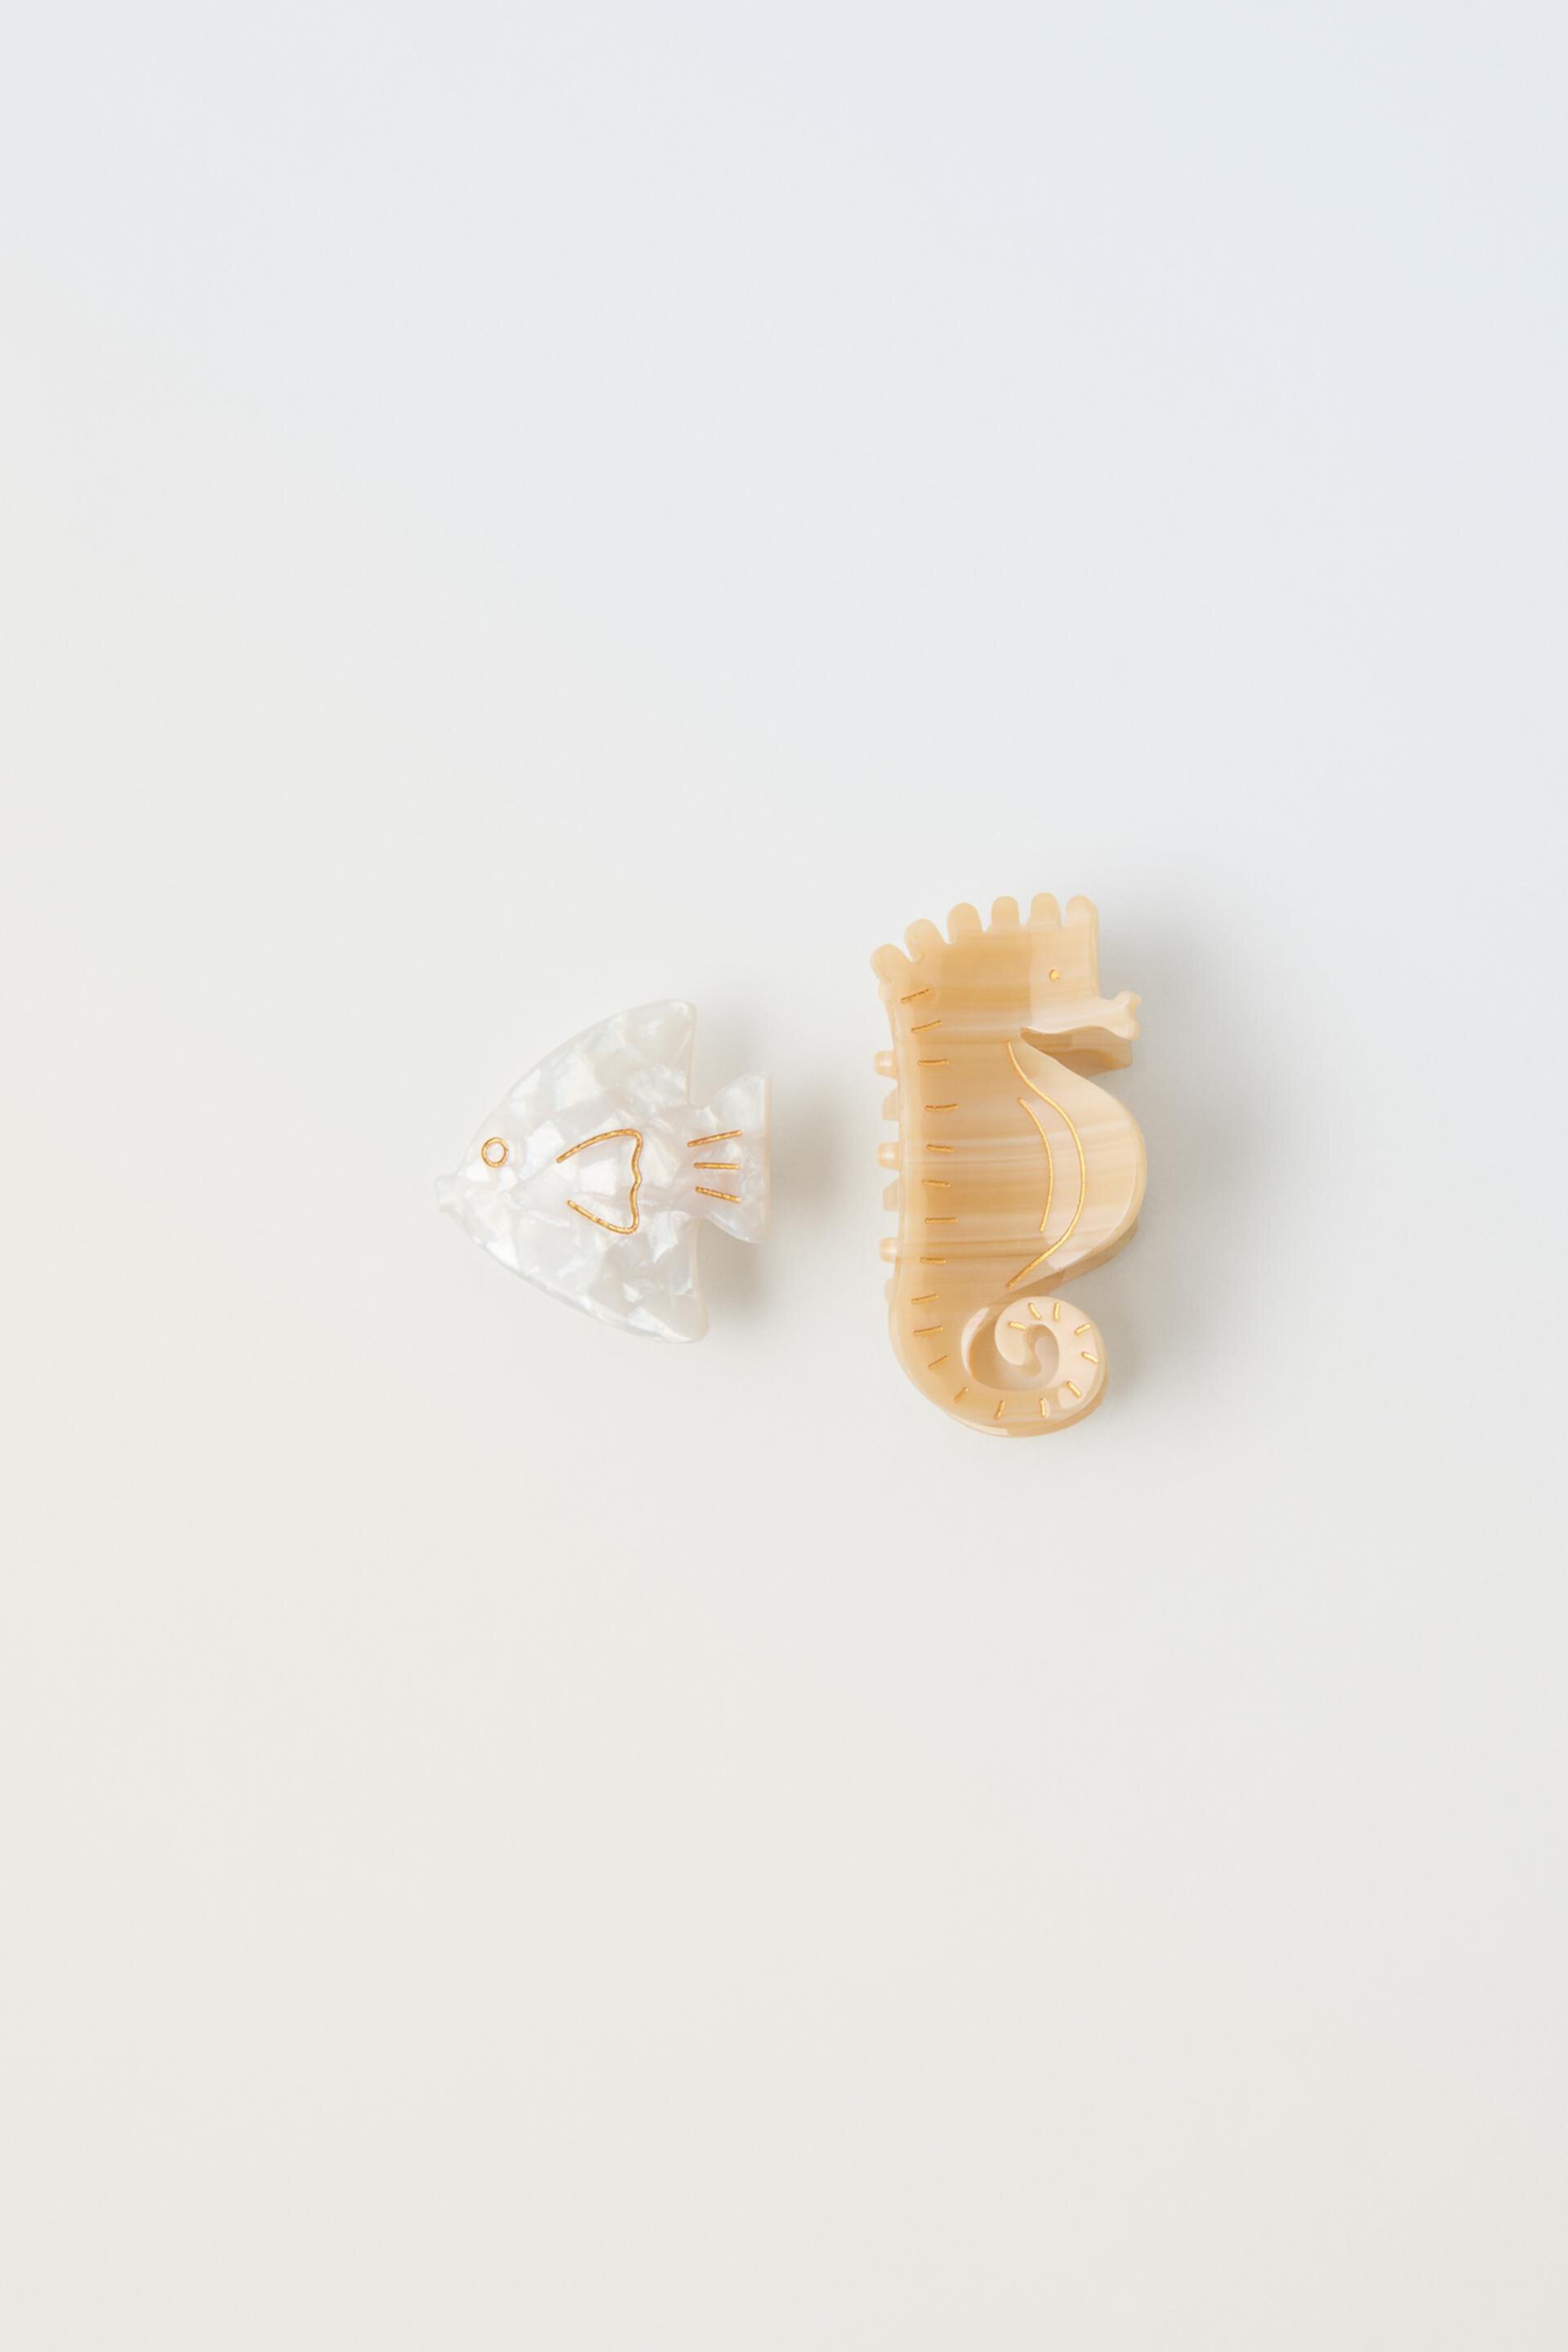 2-PACK OF SEAHORSE AND FISH HAIR CLIPS ZARA